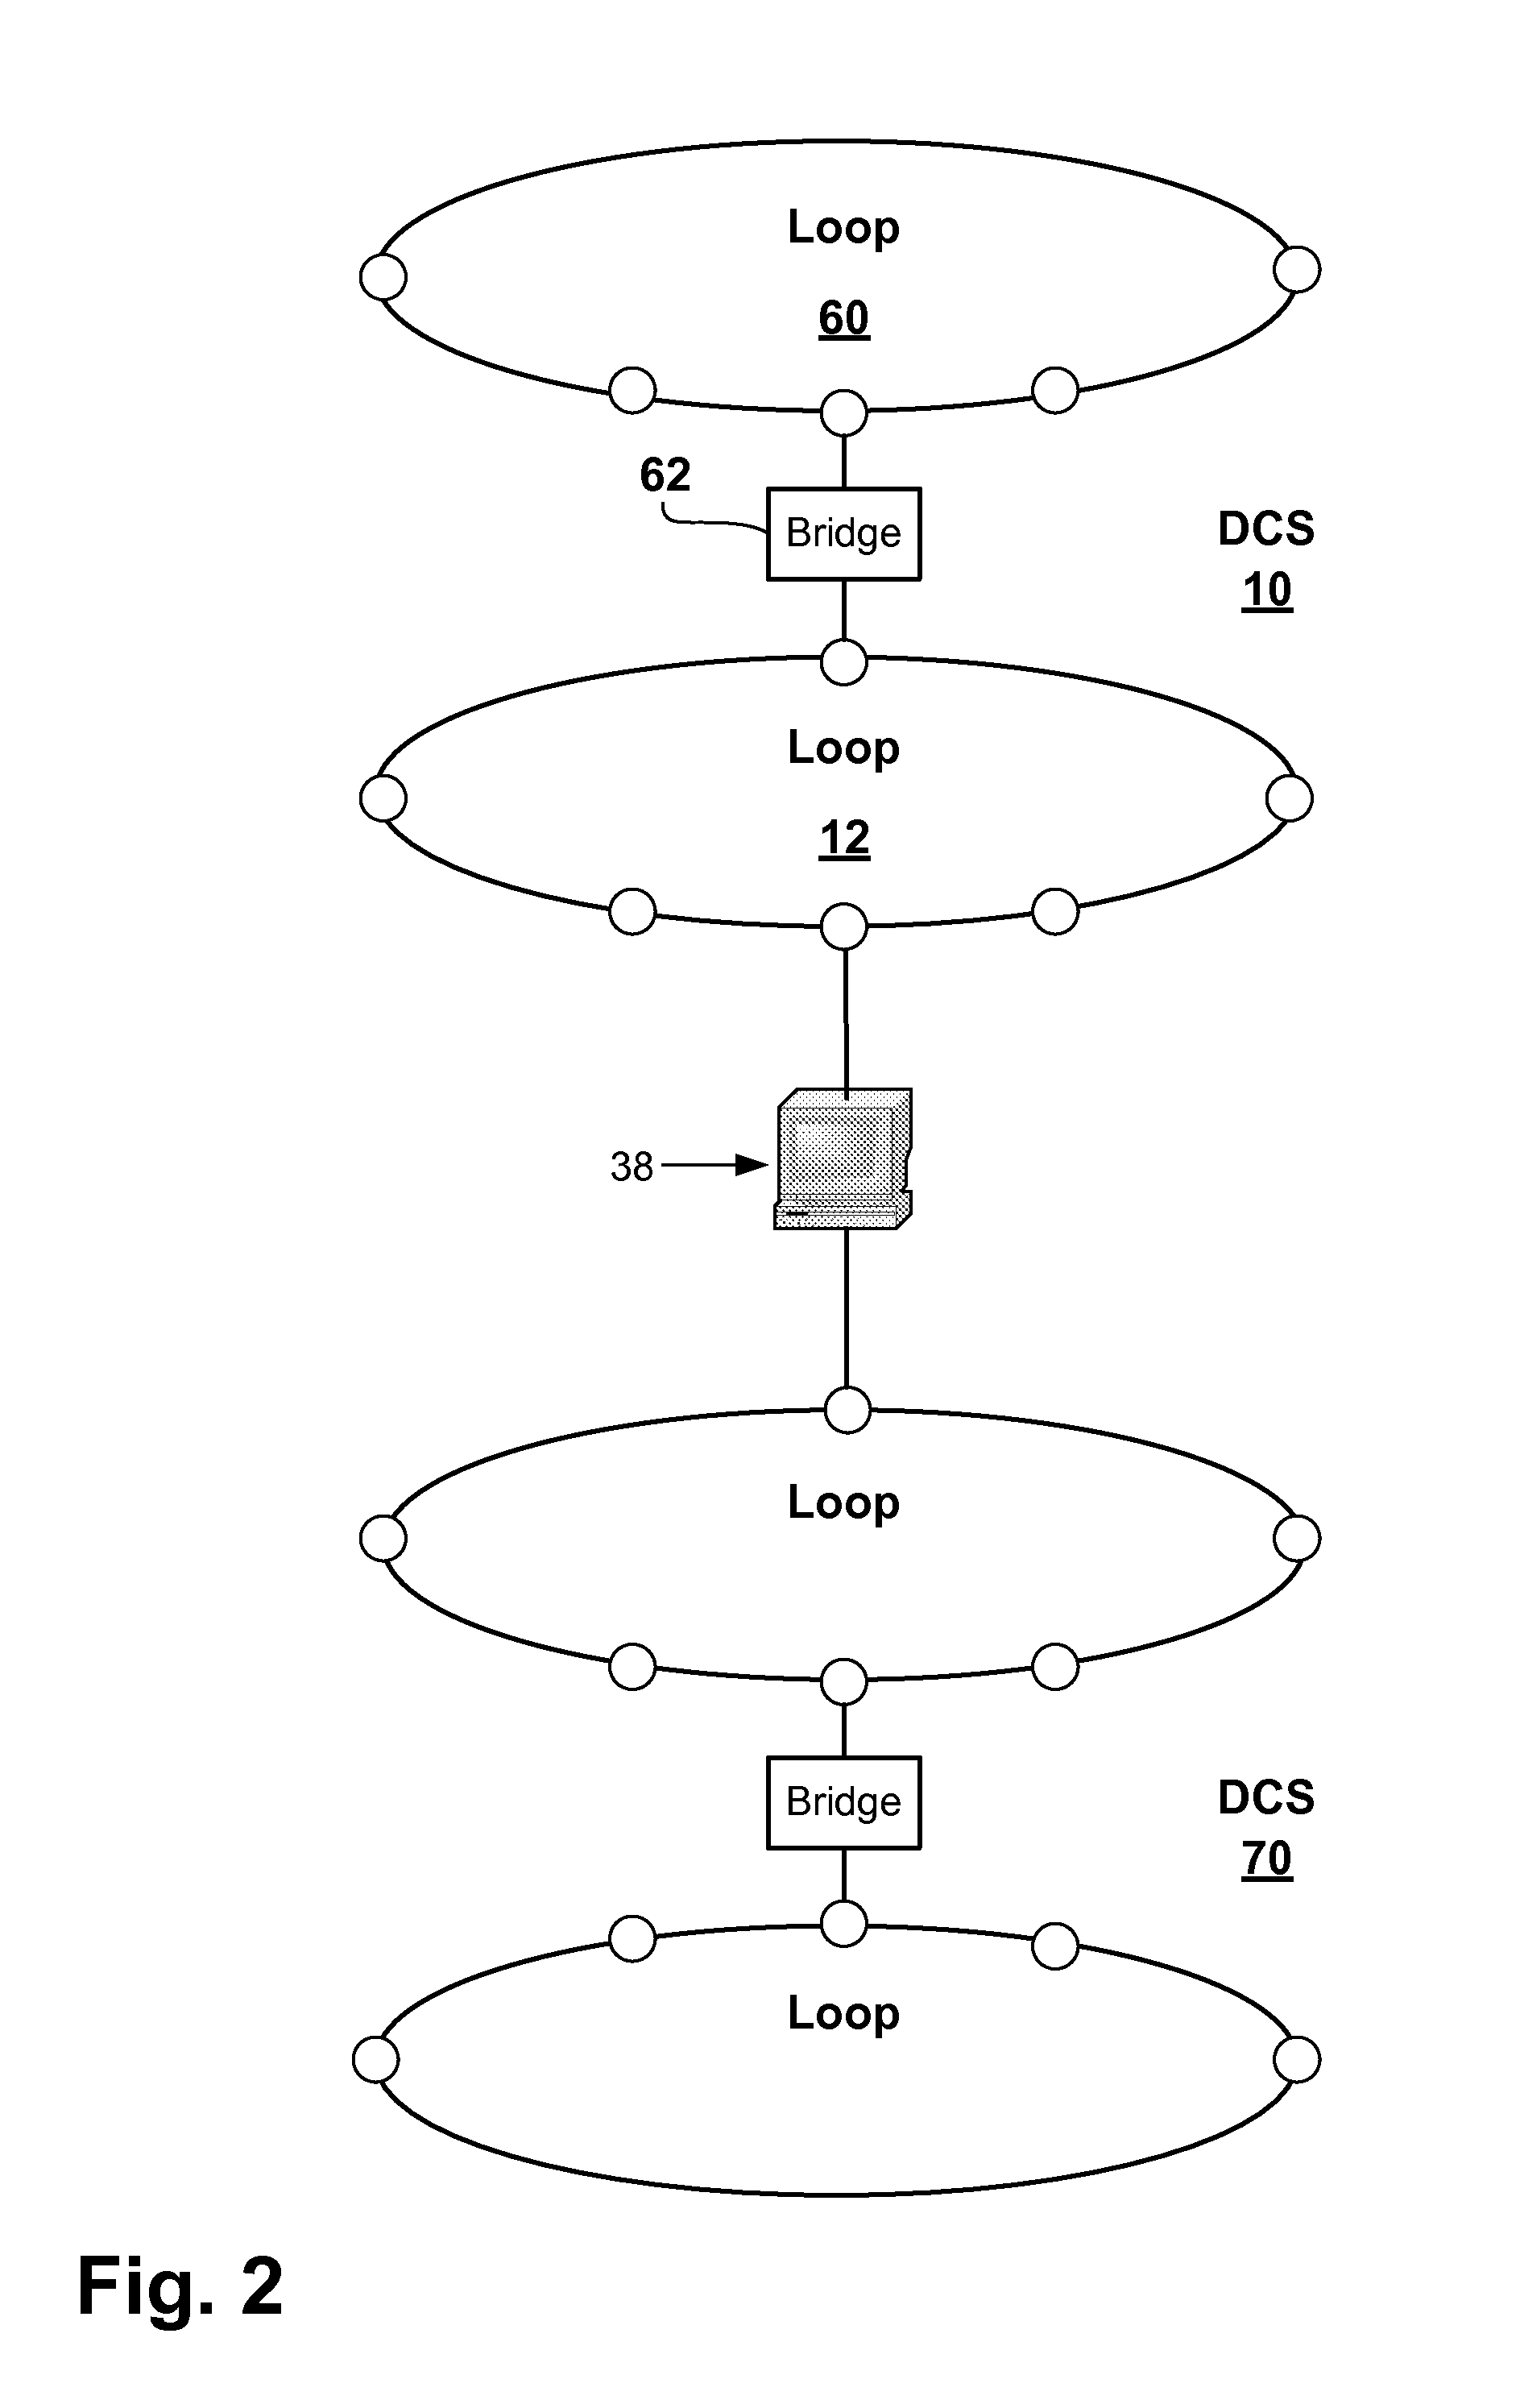 Intelligent interface for a distributed control system